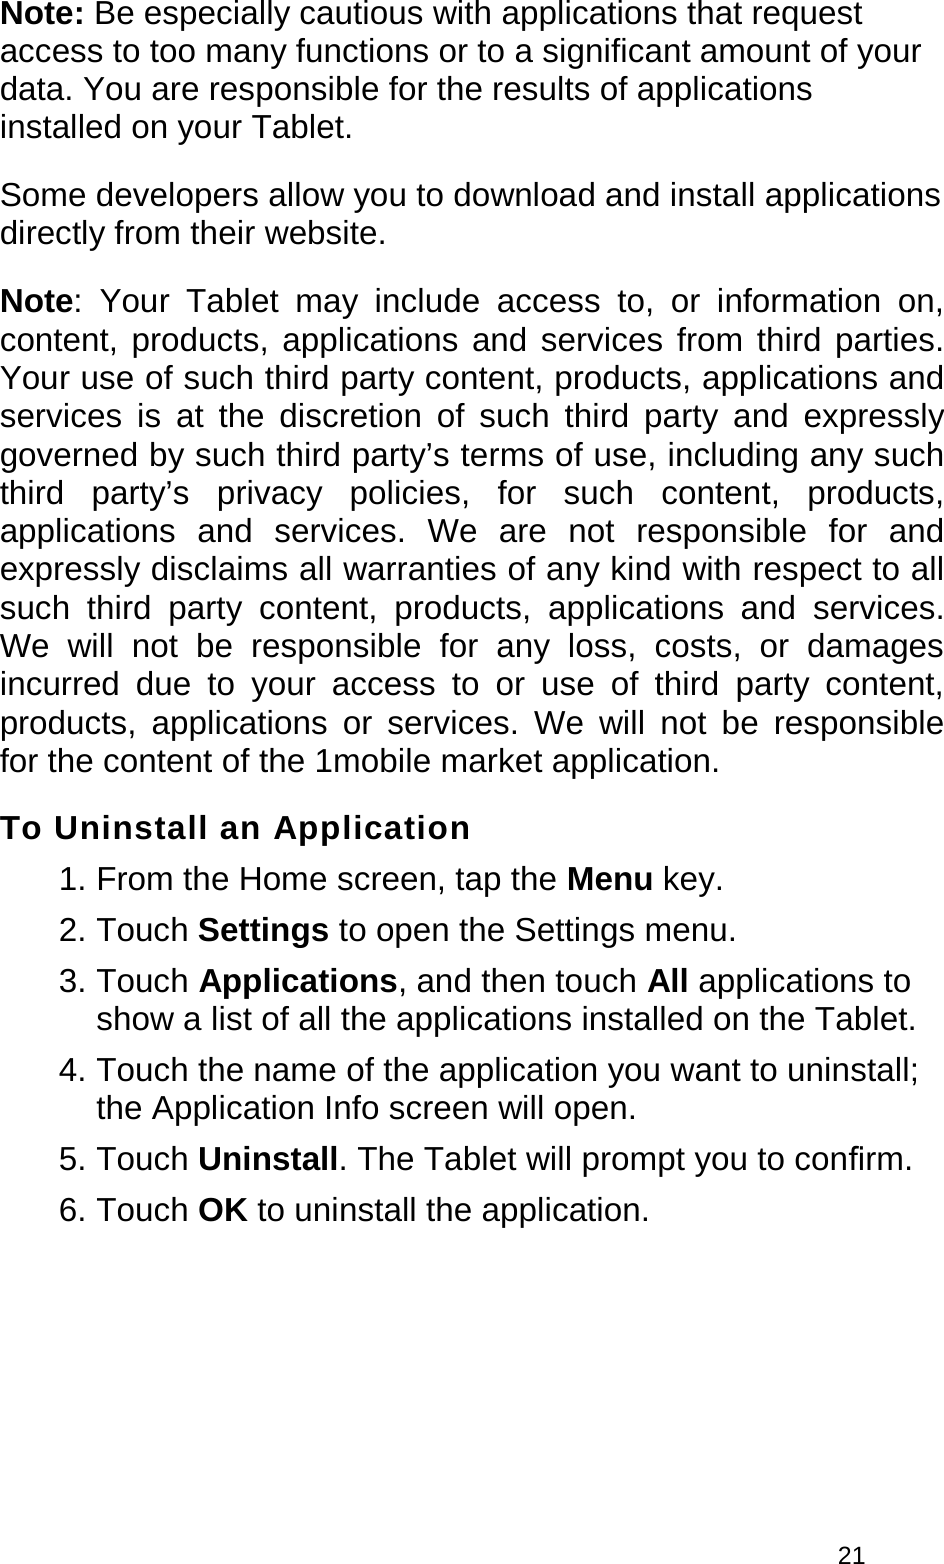 21 Note: Be especially cautious with applications that request access to too many functions or to a significant amount of your data. You are responsible for the results of applications installed on your Tablet. Some developers allow you to download and install applications directly from their website. Note: Your Tablet may include access to, or information on, content, products, applications and services from third parties. Your use of such third party content, products, applications and services is at the discretion of such third party and expressly governed by such third party’s terms of use, including any such third party’s privacy policies, for such content, products, applications and services. We are not responsible for and expressly disclaims all warranties of any kind with respect to all such third party content, products, applications and services. We will not be responsible for any loss, costs, or damages incurred due to your access to or use of third party content, products, applications or services. We will not be responsible for the content of the 1mobile market application. To Uninstall an Application 1. From the Home screen, tap the Menu key.2. Touch Settings to open the Settings menu.3. Touch Applications, and then touch All applications toshow a list of all the applications installed on the Tablet.4. Touch the name of the application you want to uninstall;the Application Info screen will open.5. Touch Uninstall. The Tablet will prompt you to conﬁrm.6. Touch OK to uninstall the application.